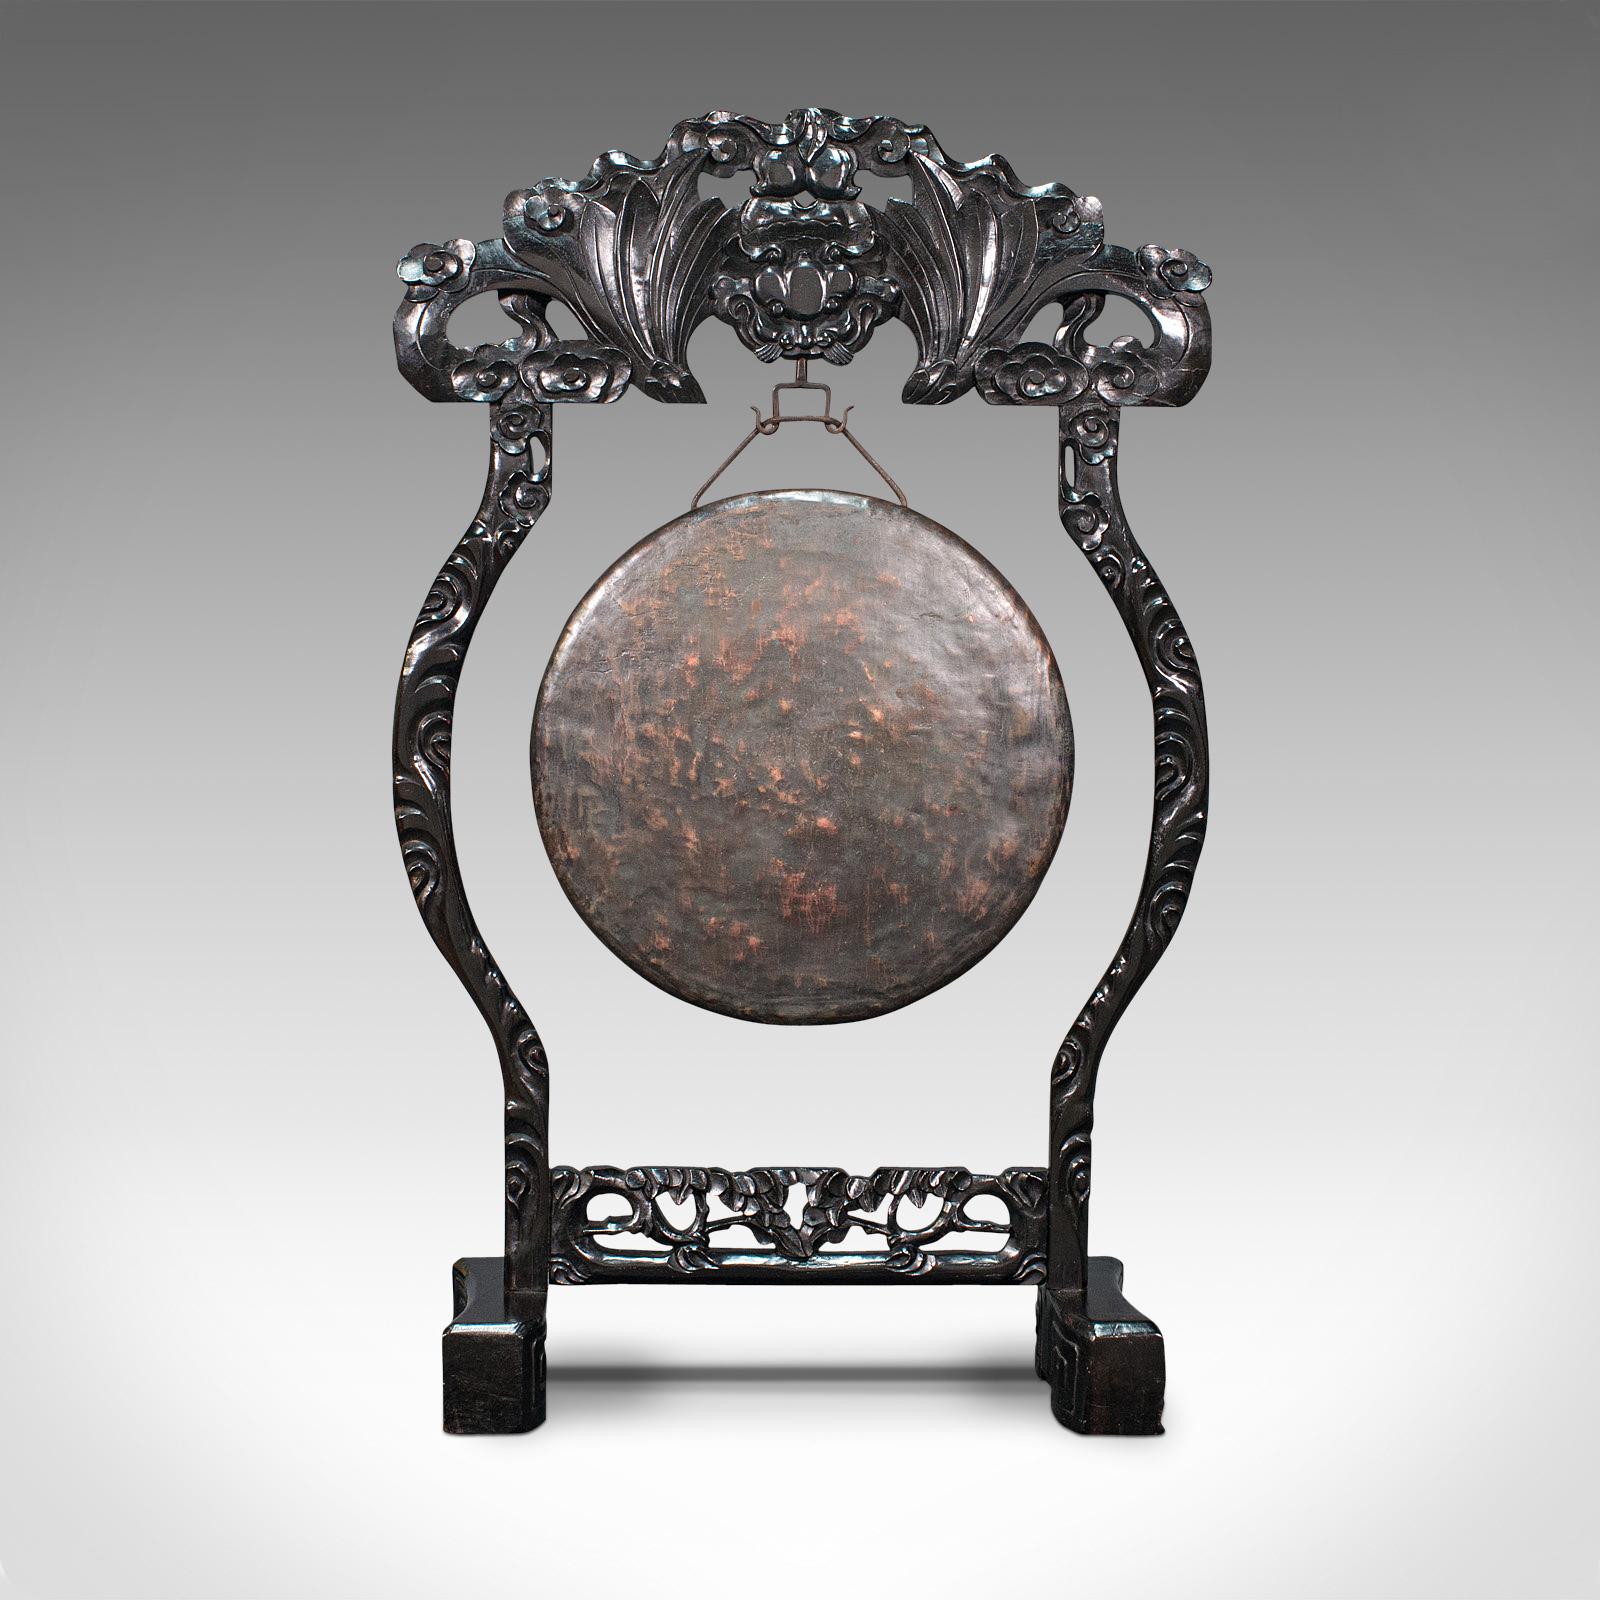 This is an antique dinner gong. An Oriental, ebonised teak stand with Chinoiserie taste hosting a bronze gong, dating to the Victorian period, circa 1880.

Elaborately carved stand ideal for the dinner hall - generous 3' tall frame
Displaying a